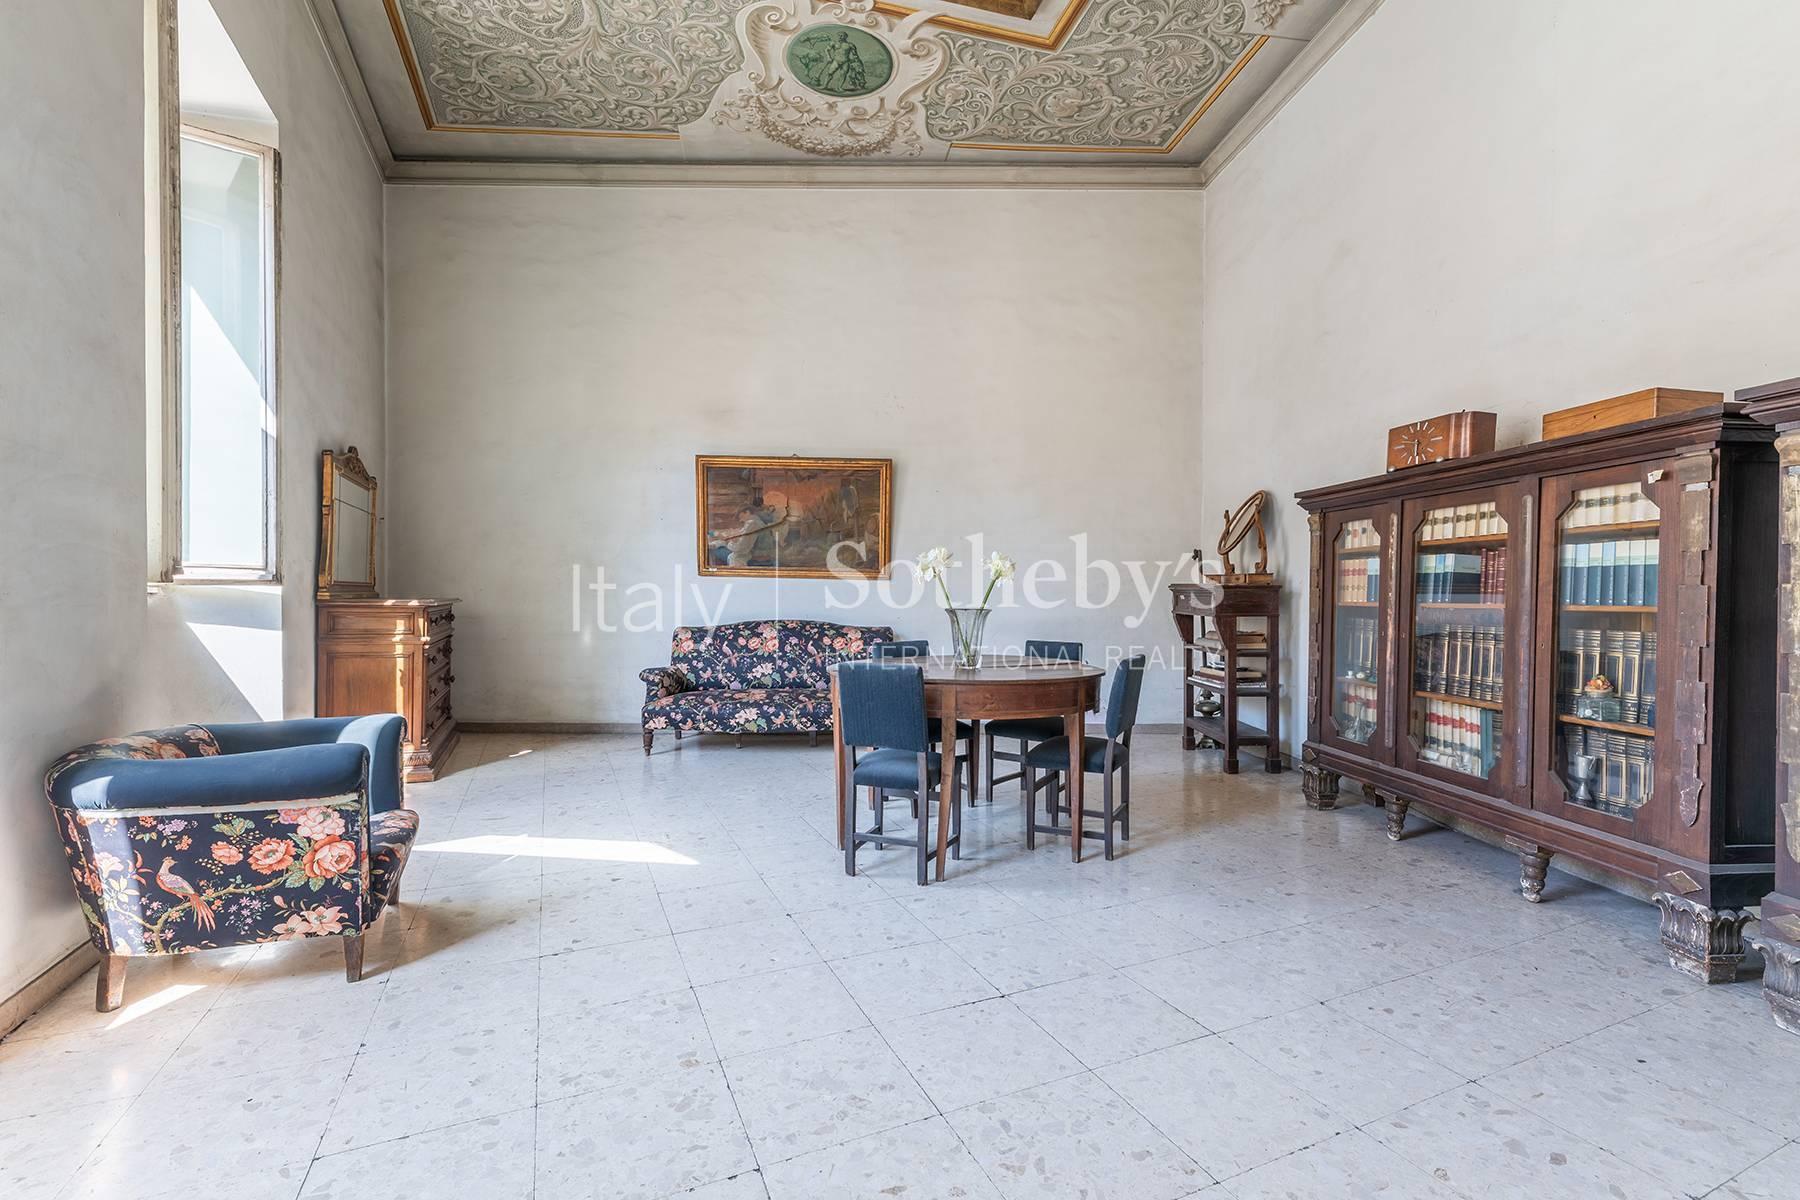 Charming and bright apartment in the heart of Trastevere - 17